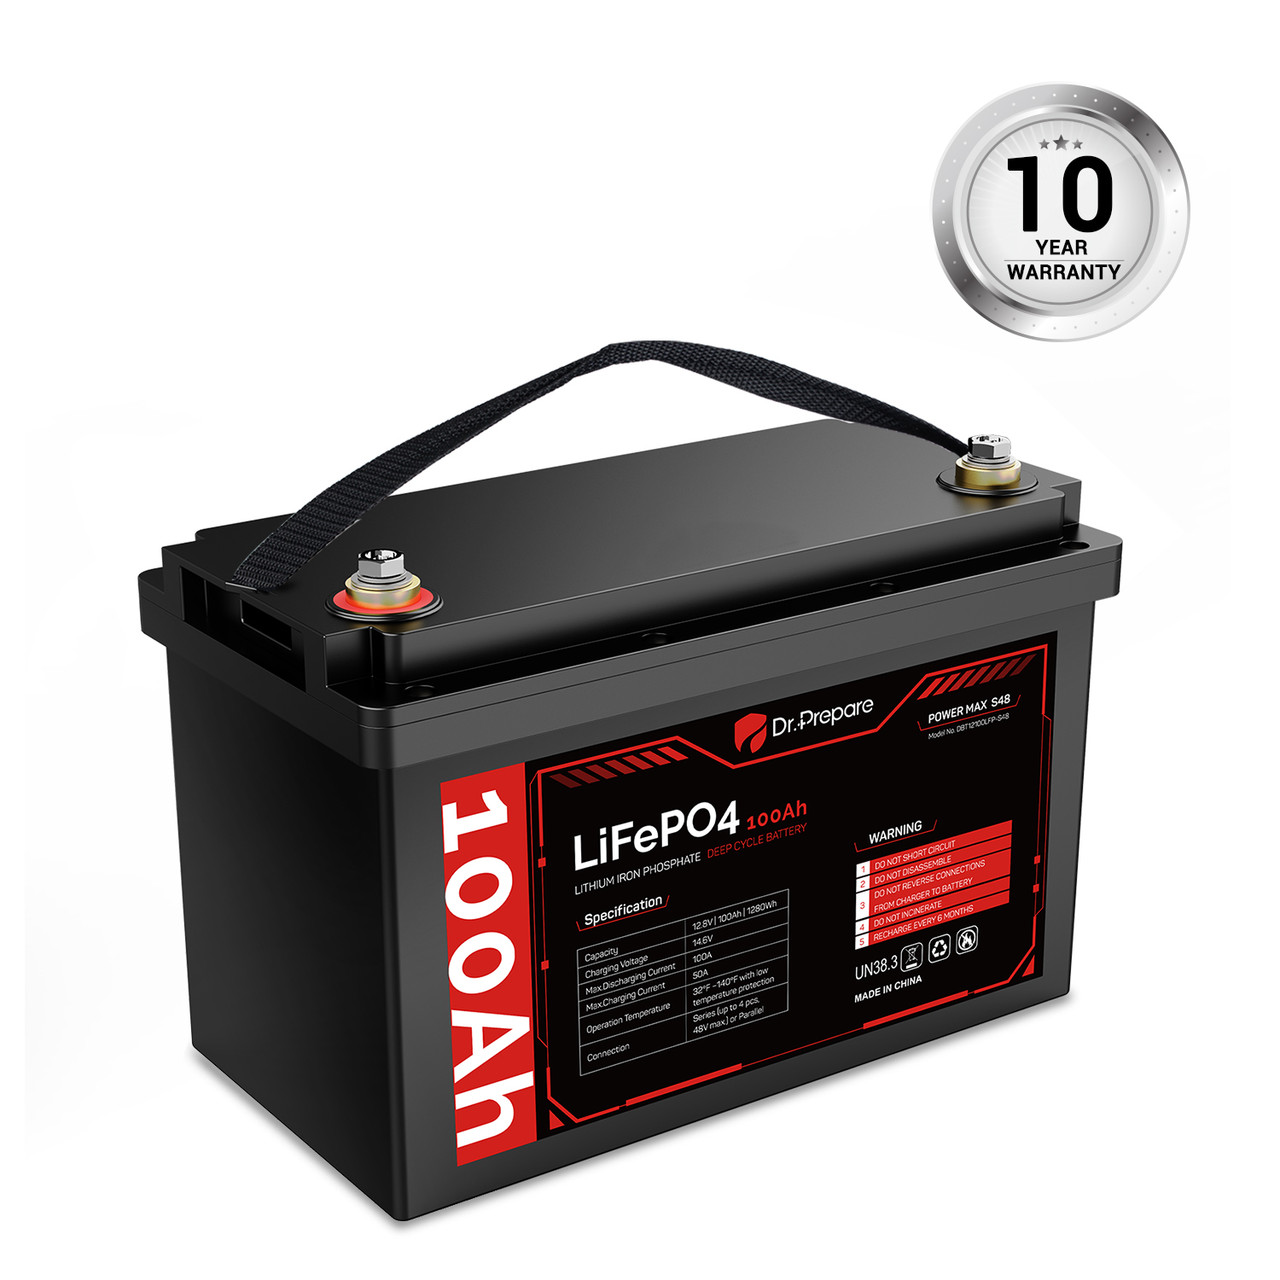 Bluetooth Lithium Sealed Battery - 12 V - 100 Ah - 1280 Wh - LiFePo4